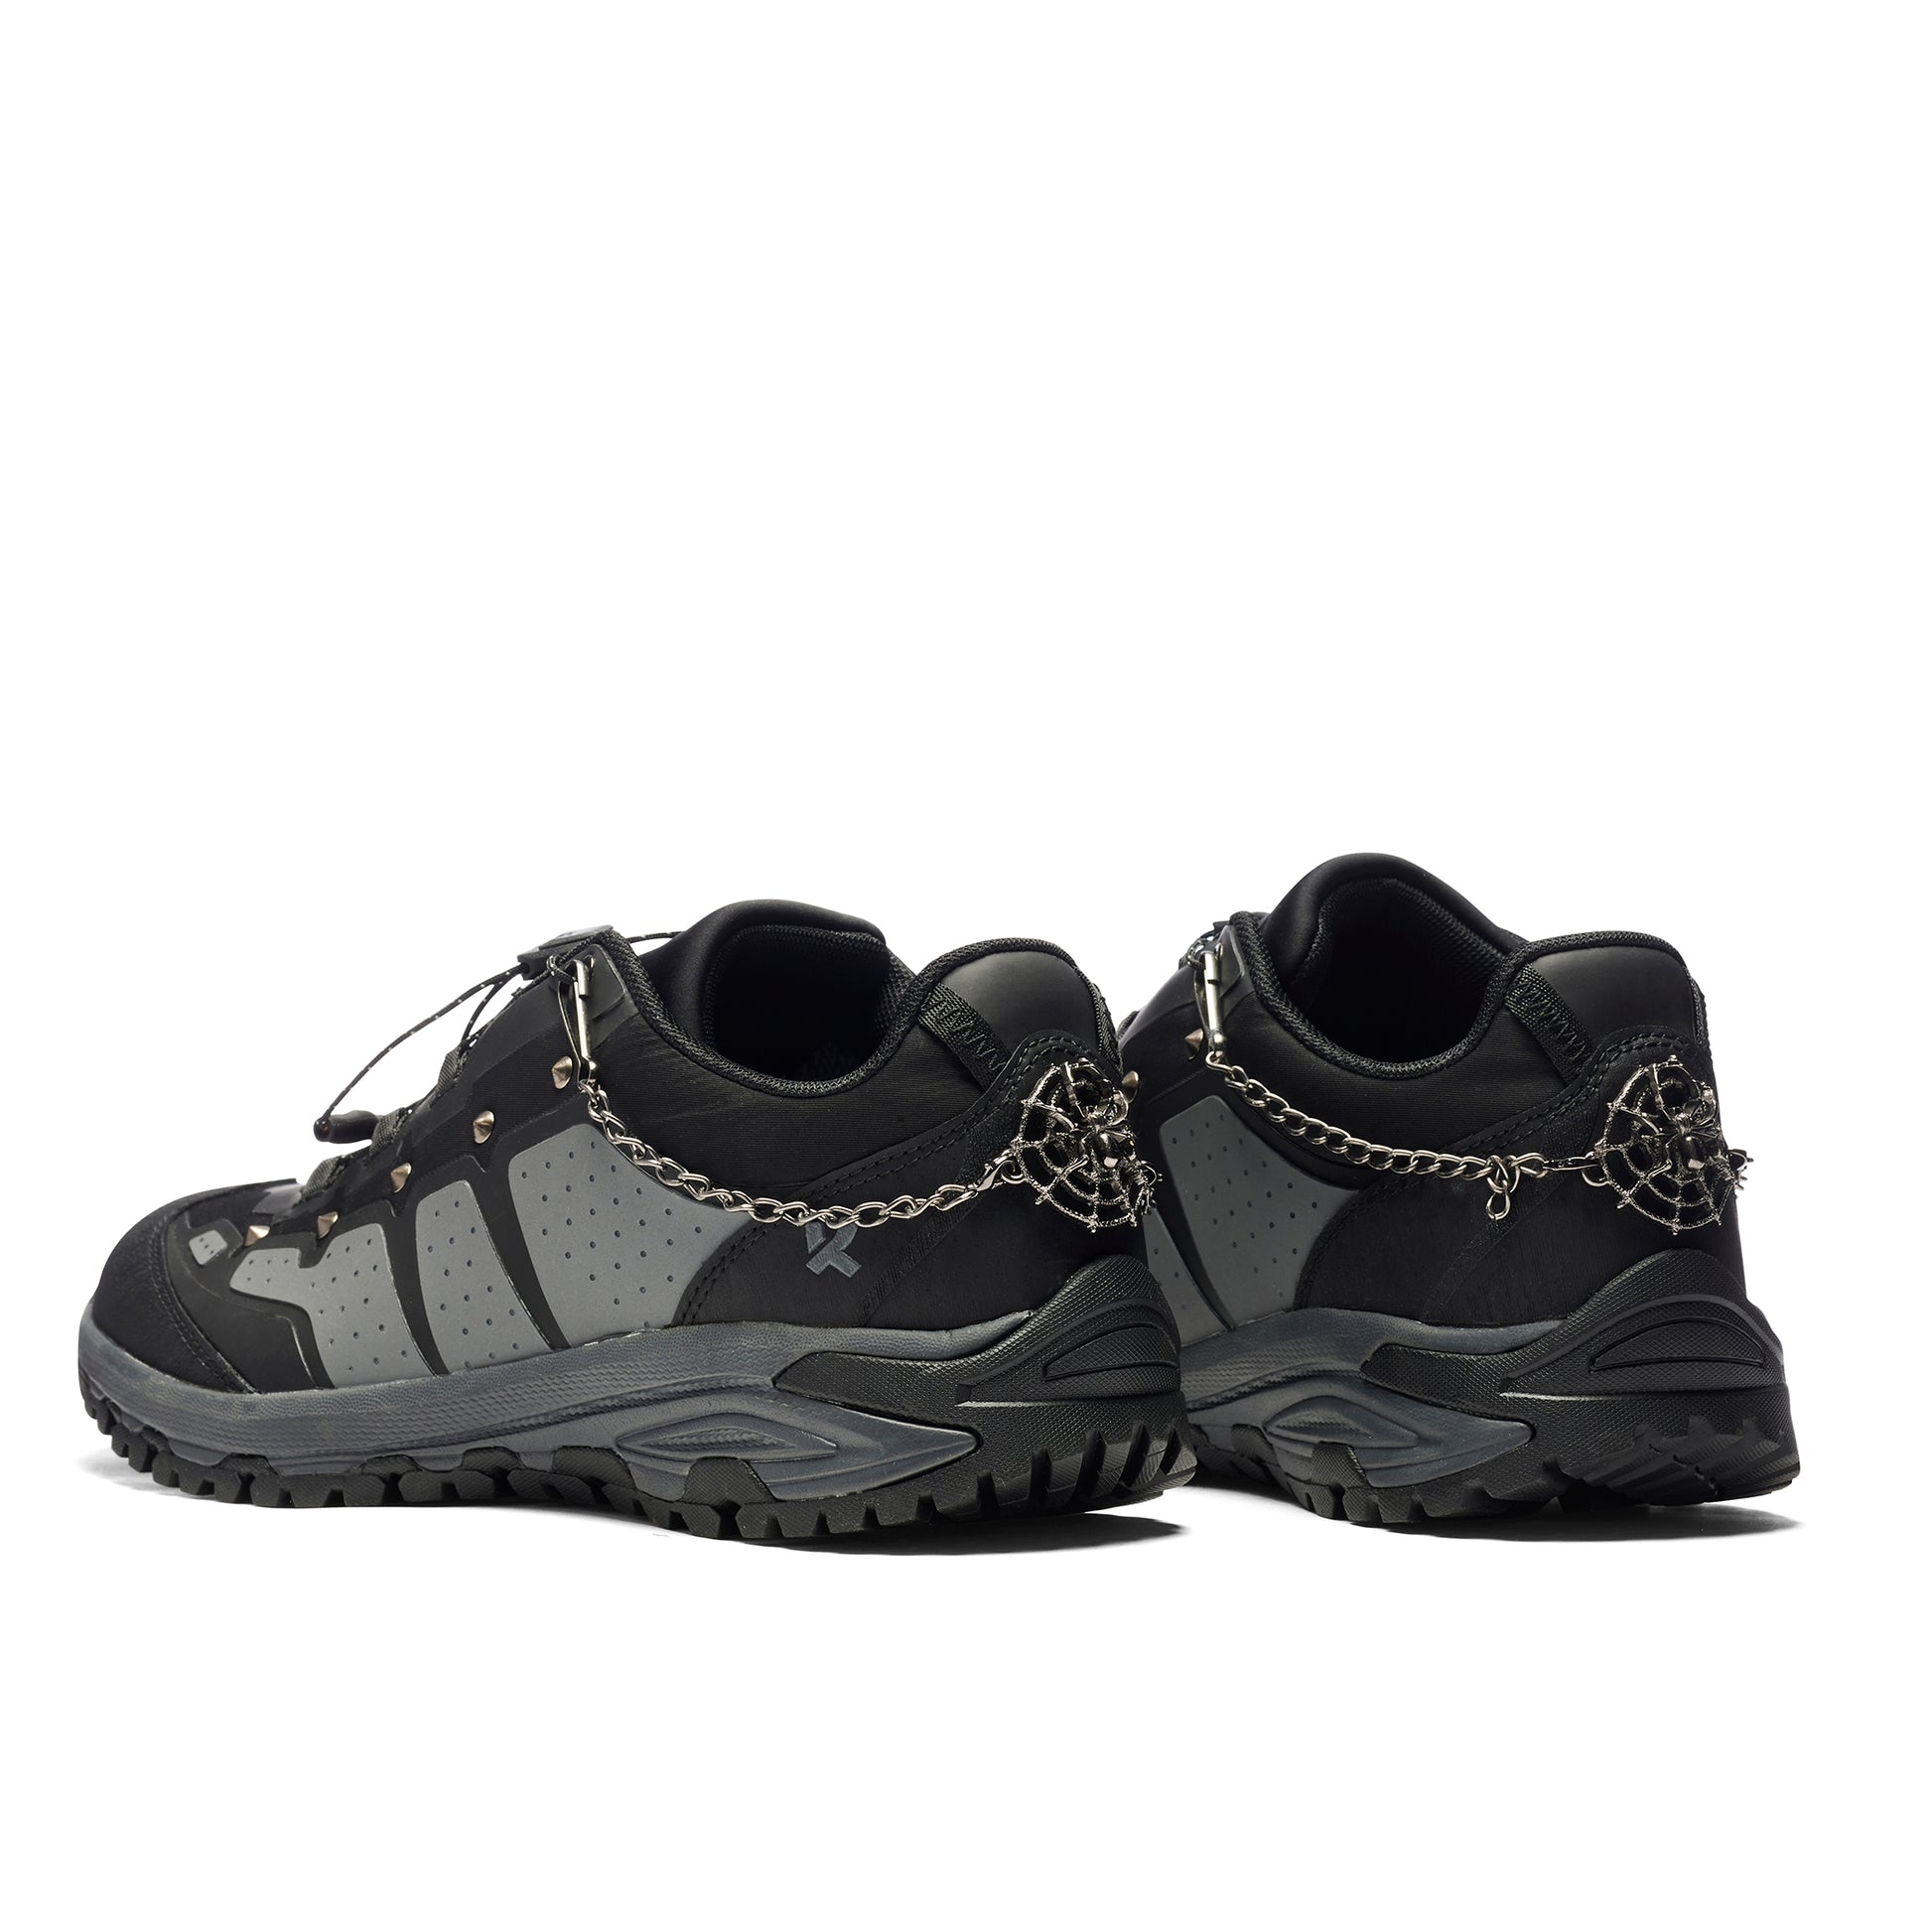 Wandering Spider Spiked Men's Hiking Shoes - Grey - Koi Footwear - Back View